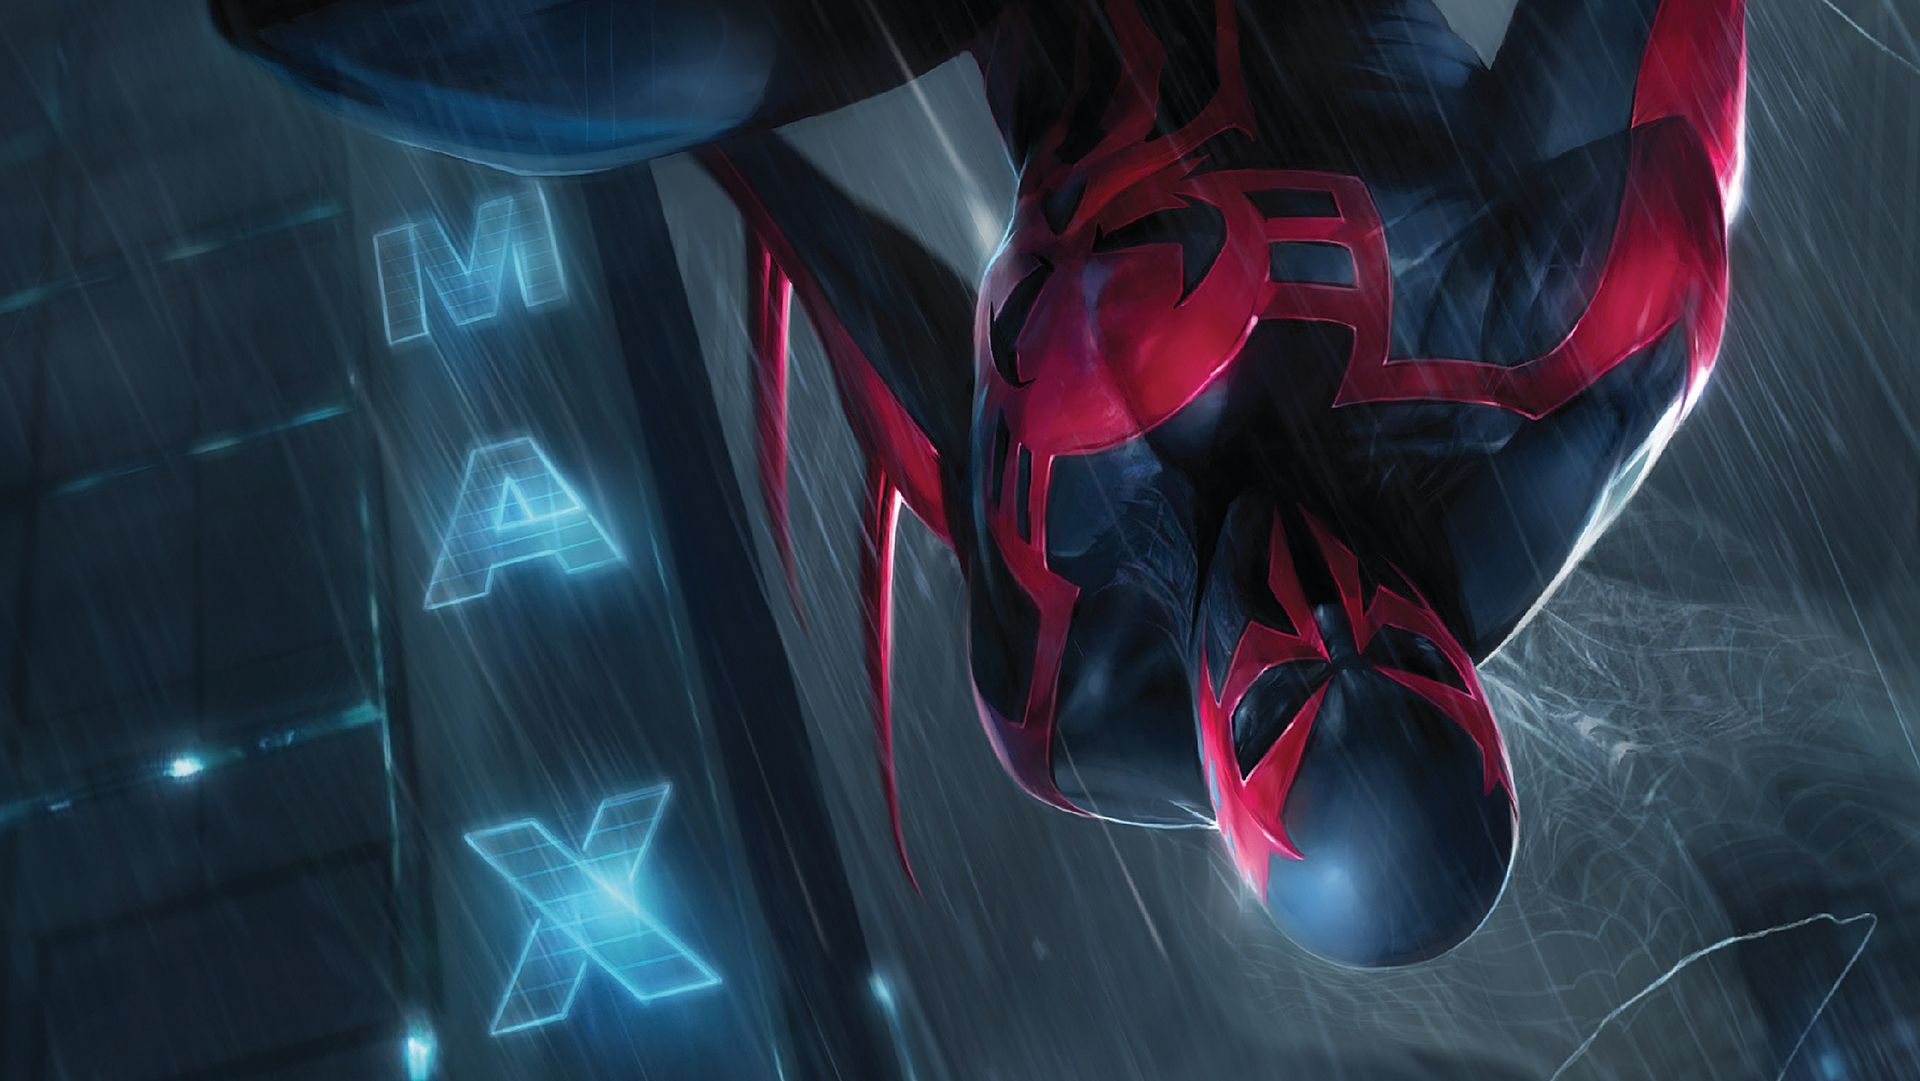 Marvel Spider Man Anime Wallpapers Wallpaper Cave